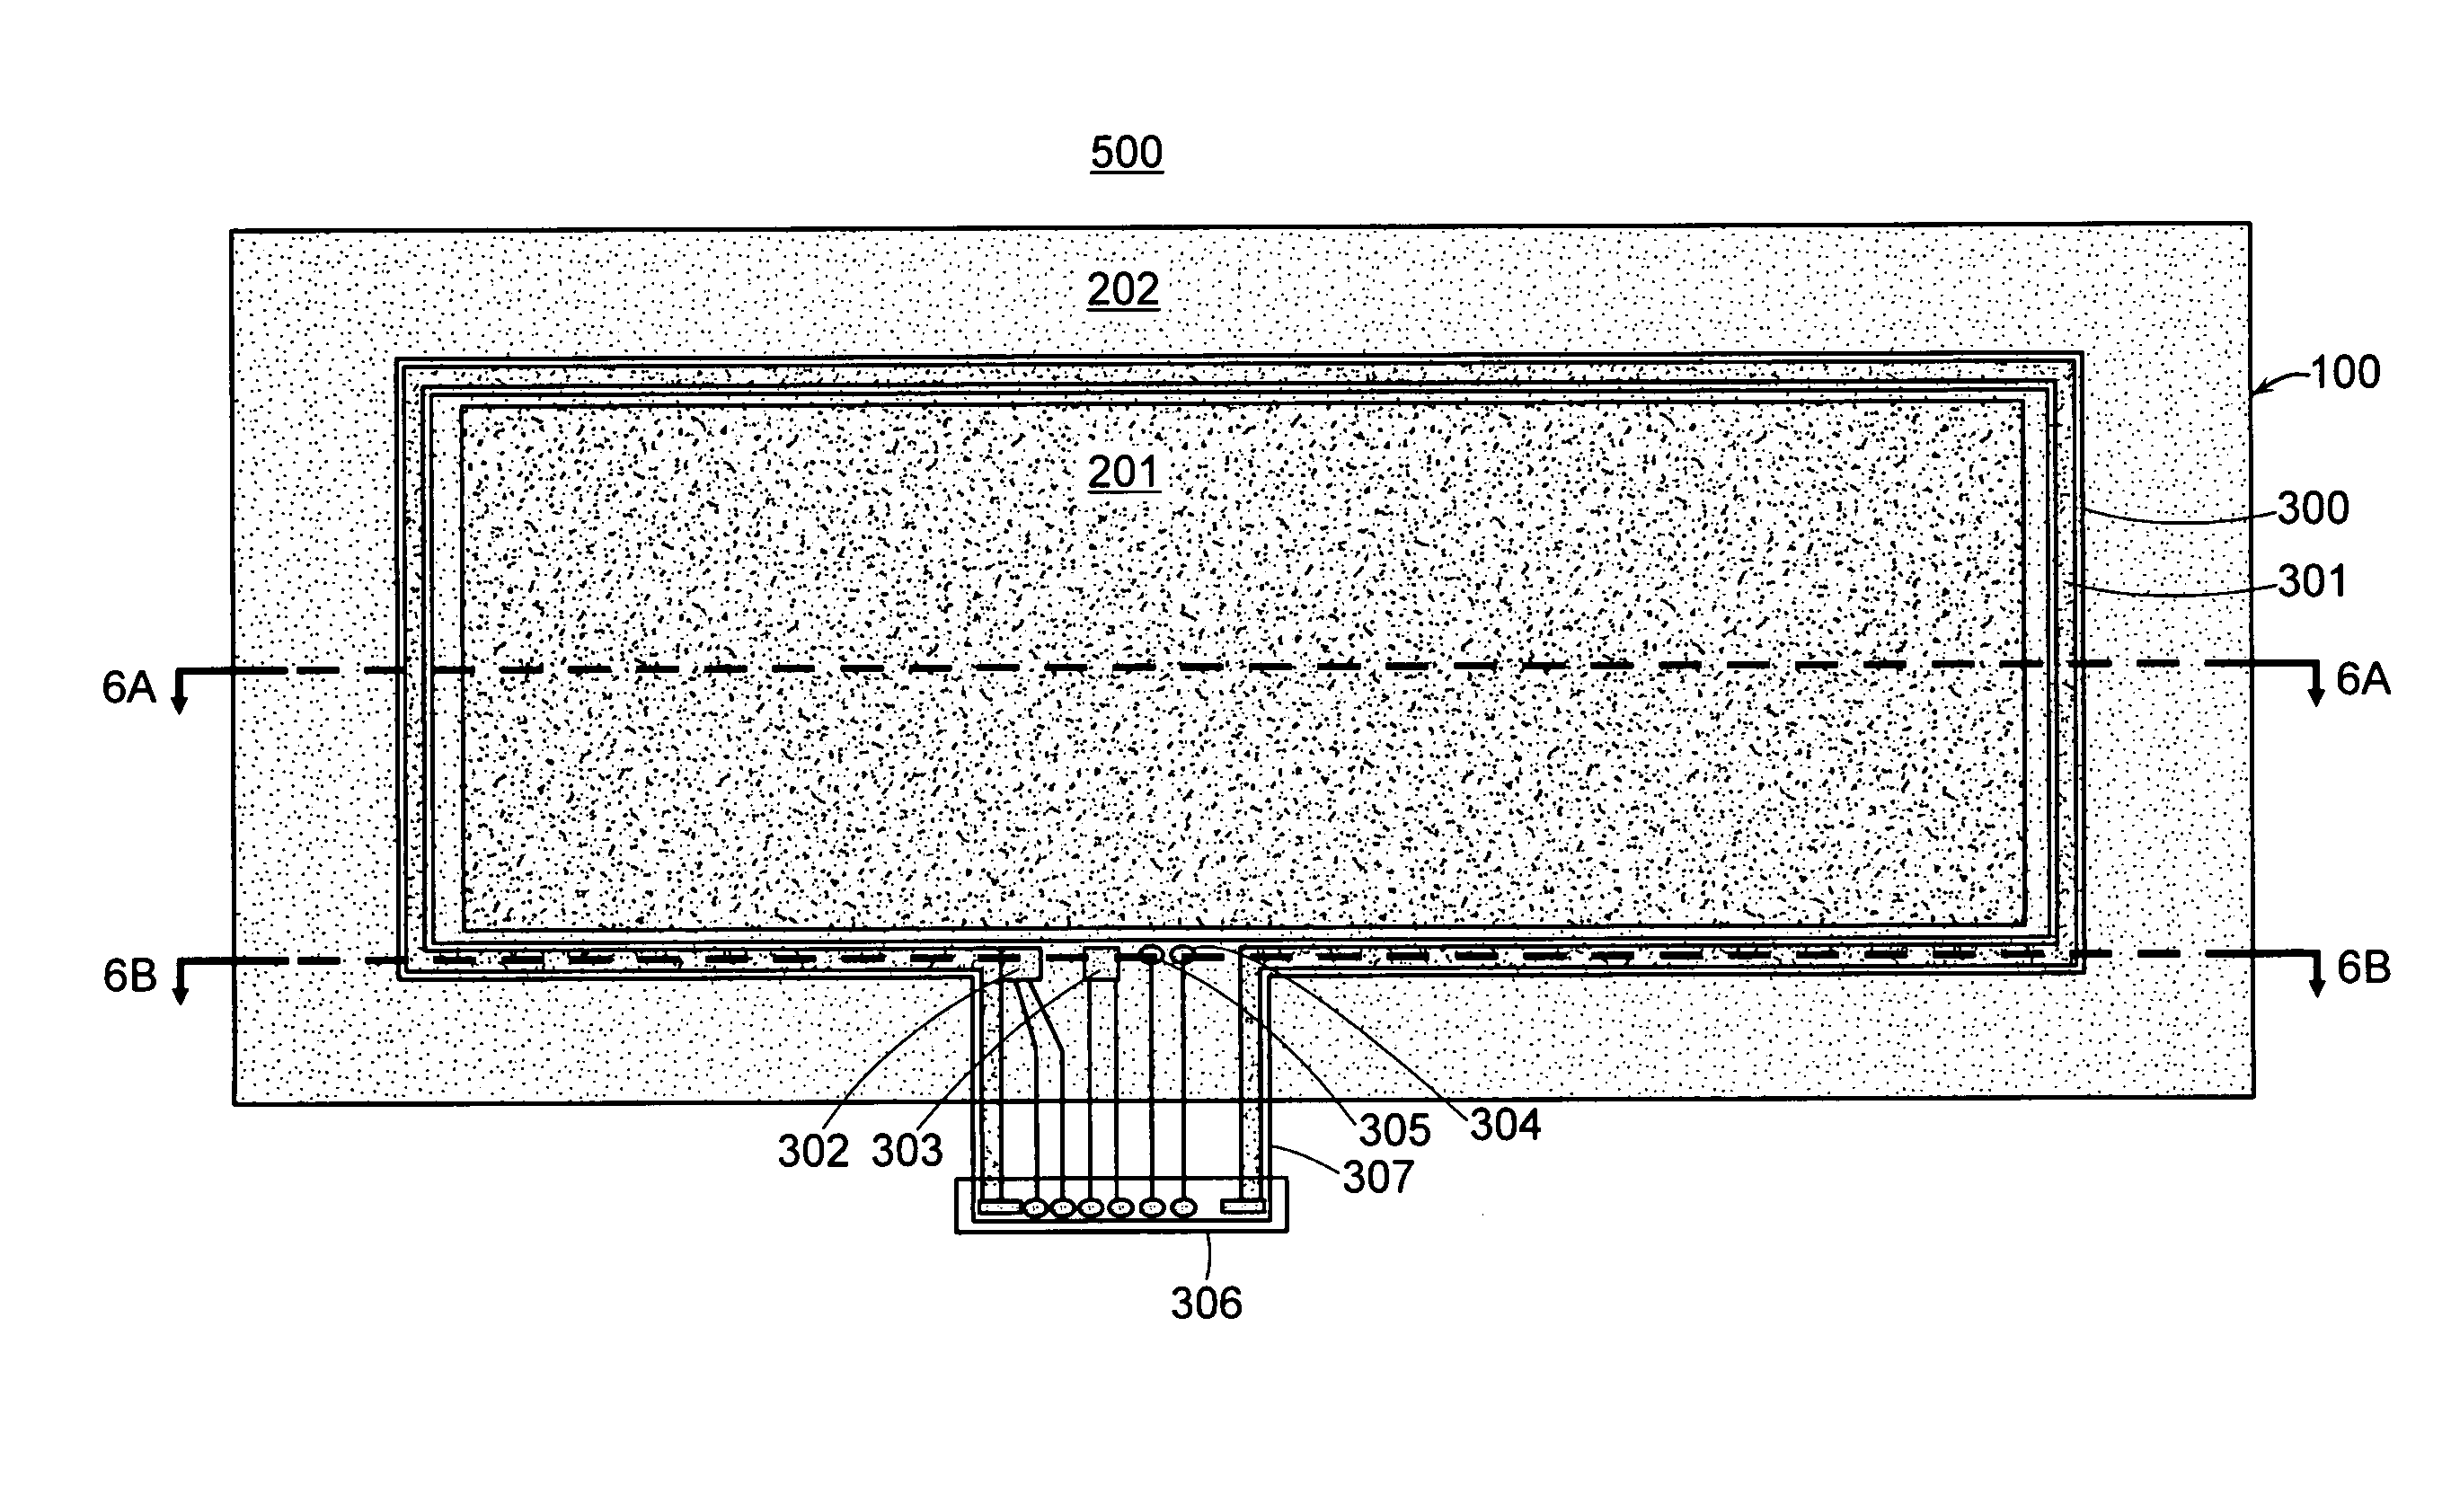 Membrane electrode assembly containing flexible printed circuit board formed on ion exchange membrane support film